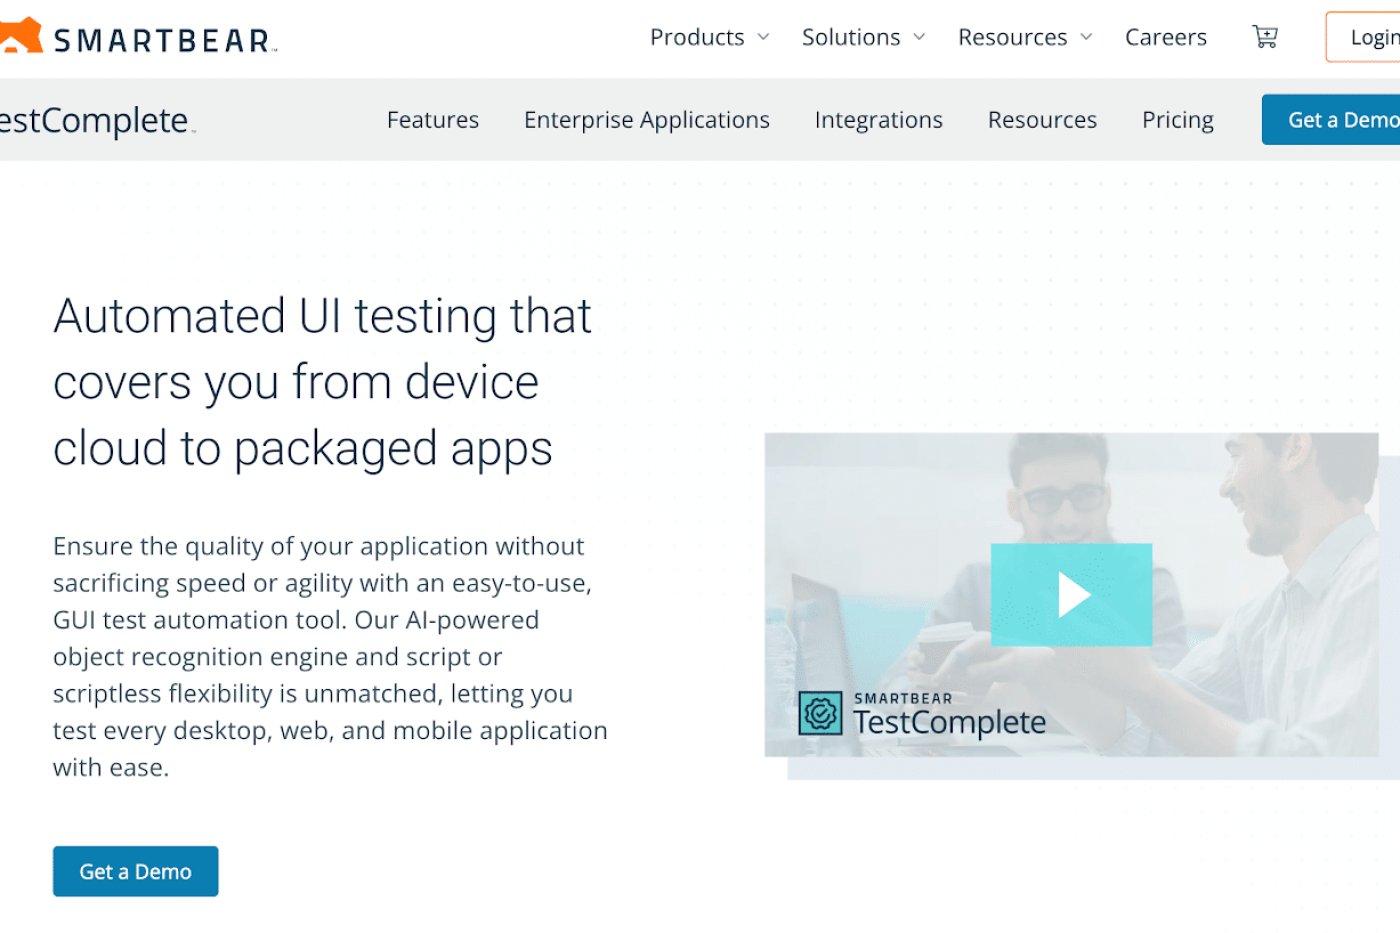 TestComplete Mobile App Testing: A Detailed Review 2023